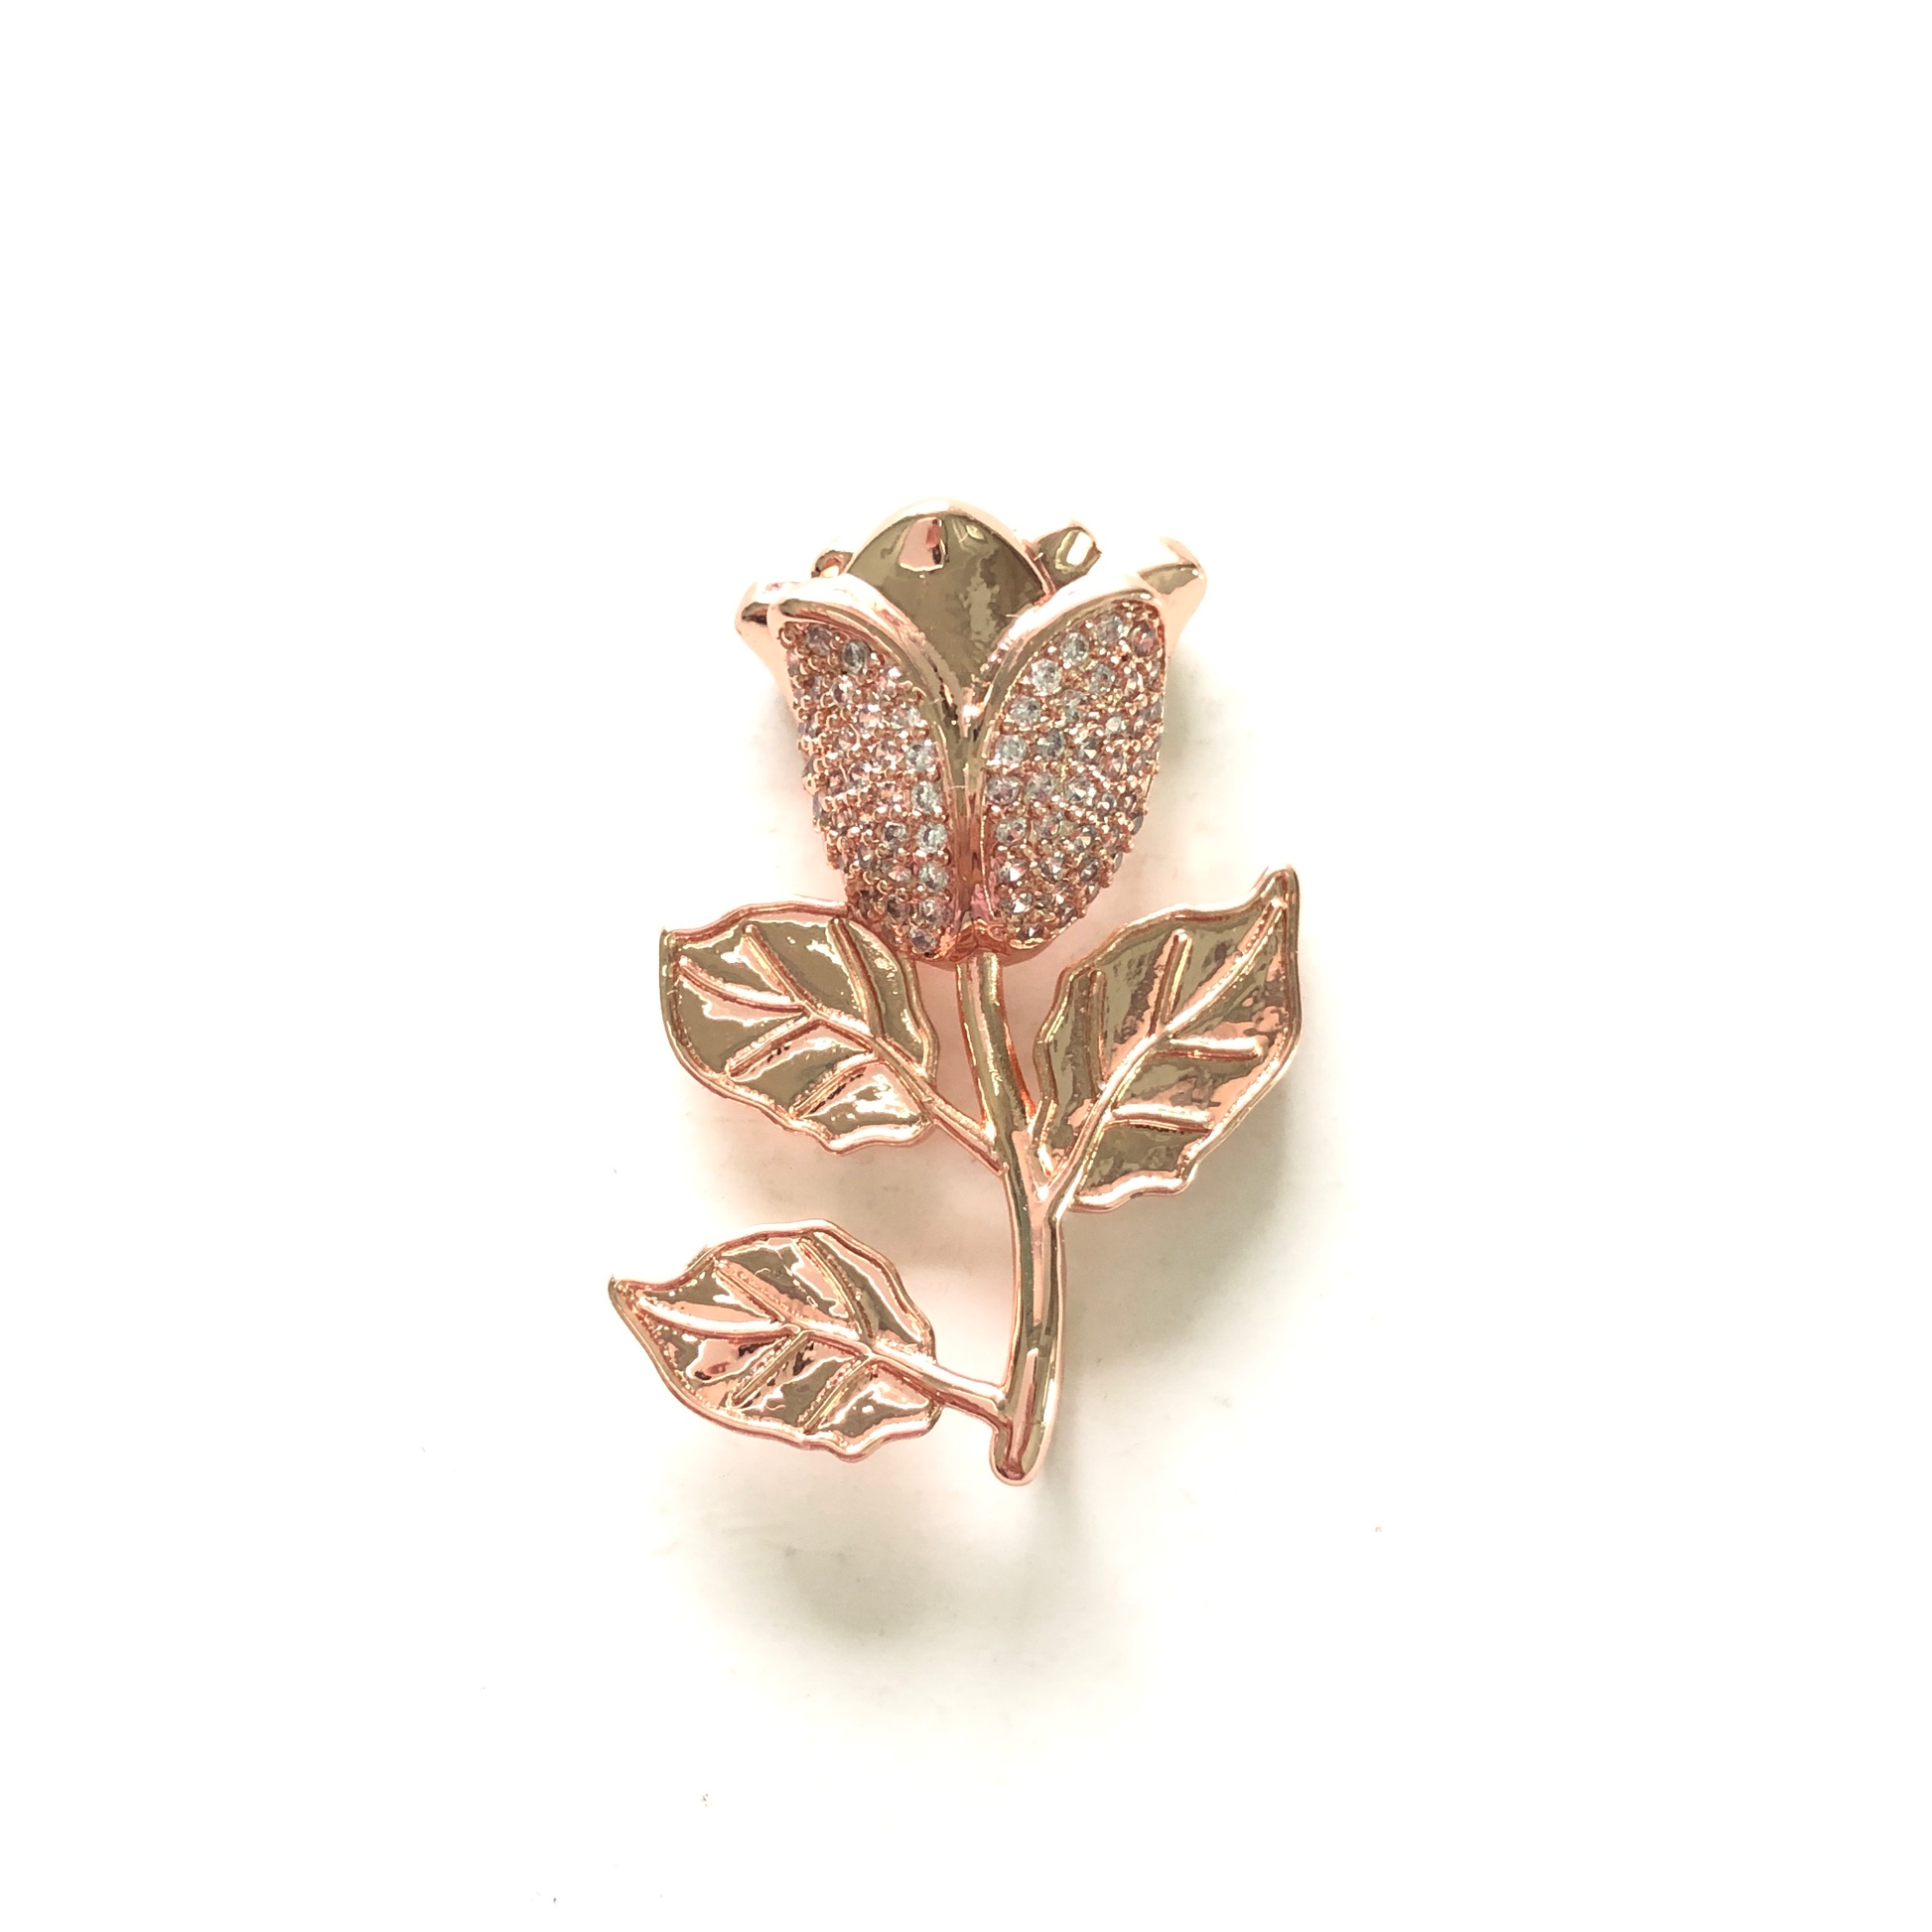 10pcs/lot 32*23mm Clear CZ Paved Rose Flower Charms Rose Gold CZ Paved Charms Flowers Large Sizes On Sale Charms Beads Beyond